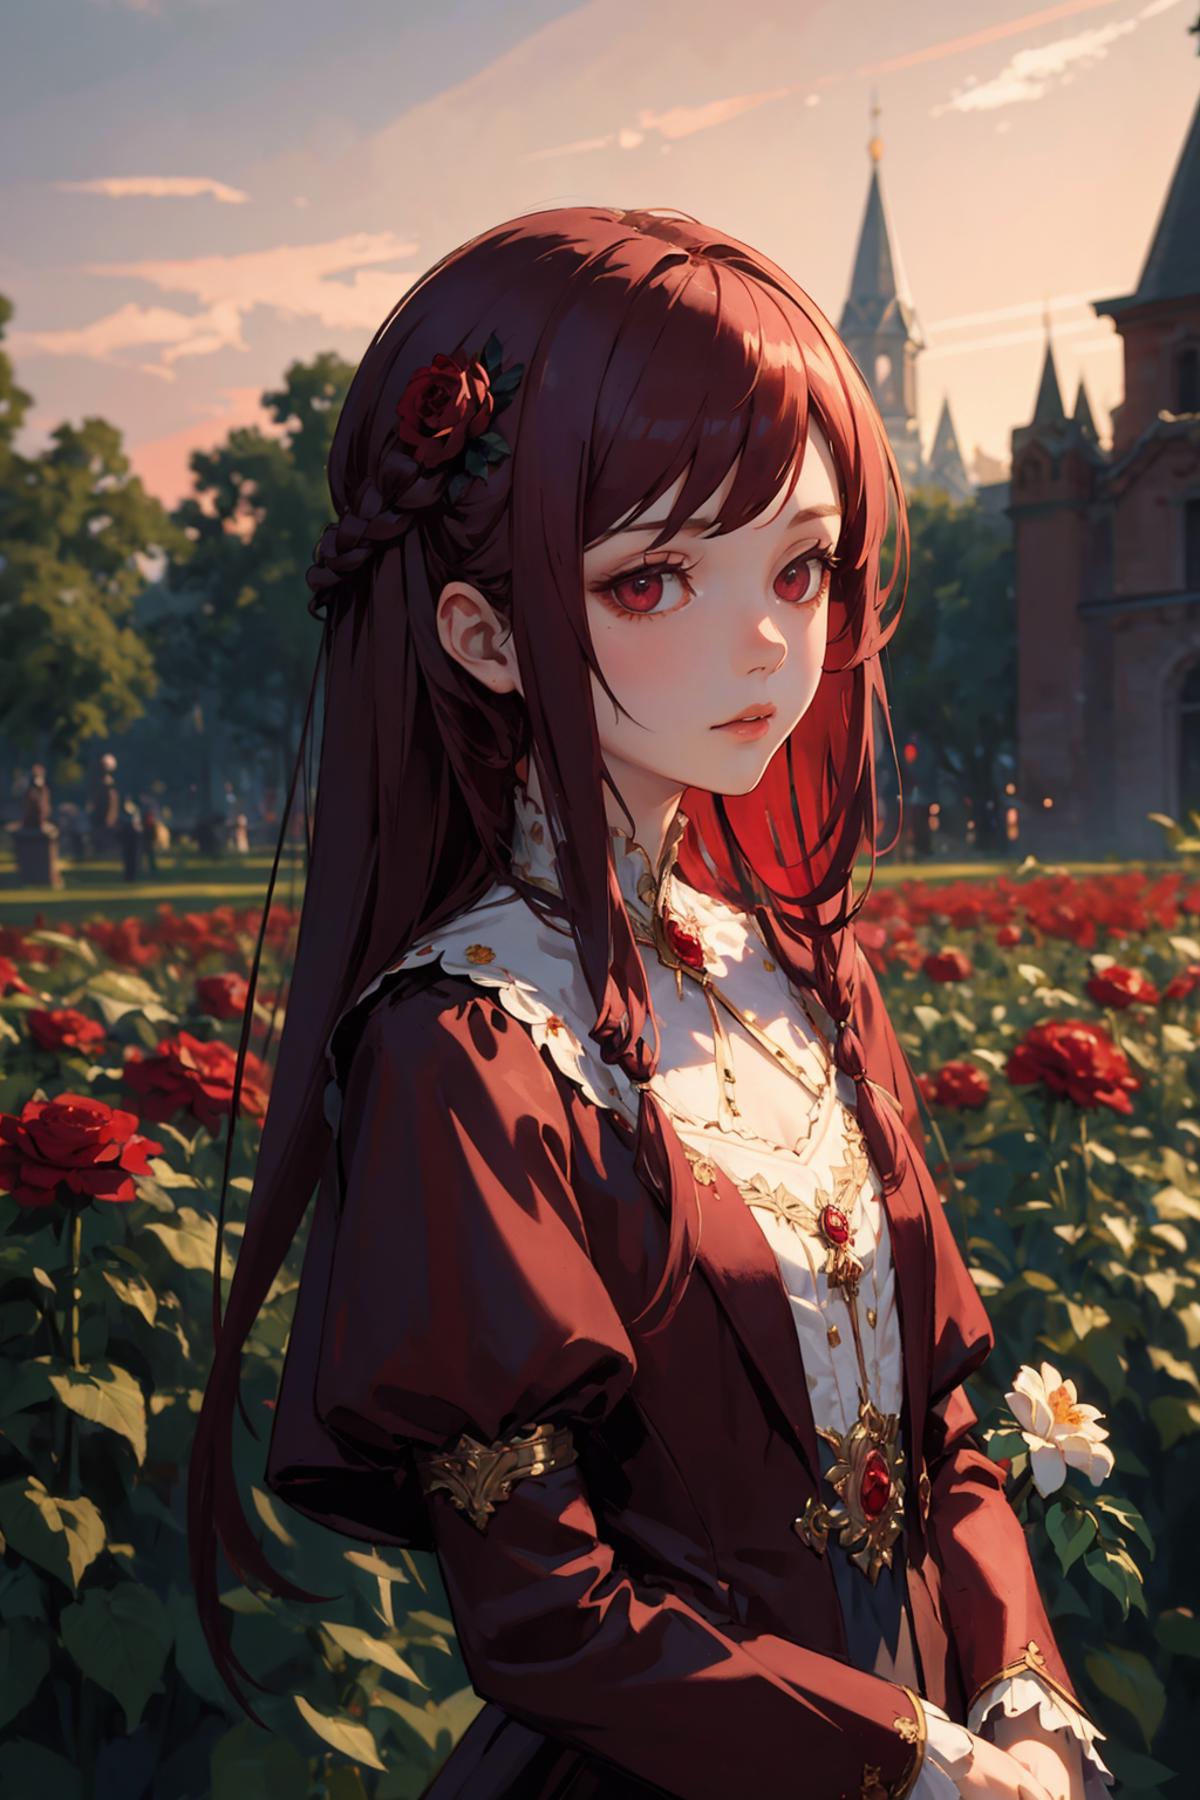 Anime girl with red hair and red eyes dressed in a white and brown dress, holding a flower.